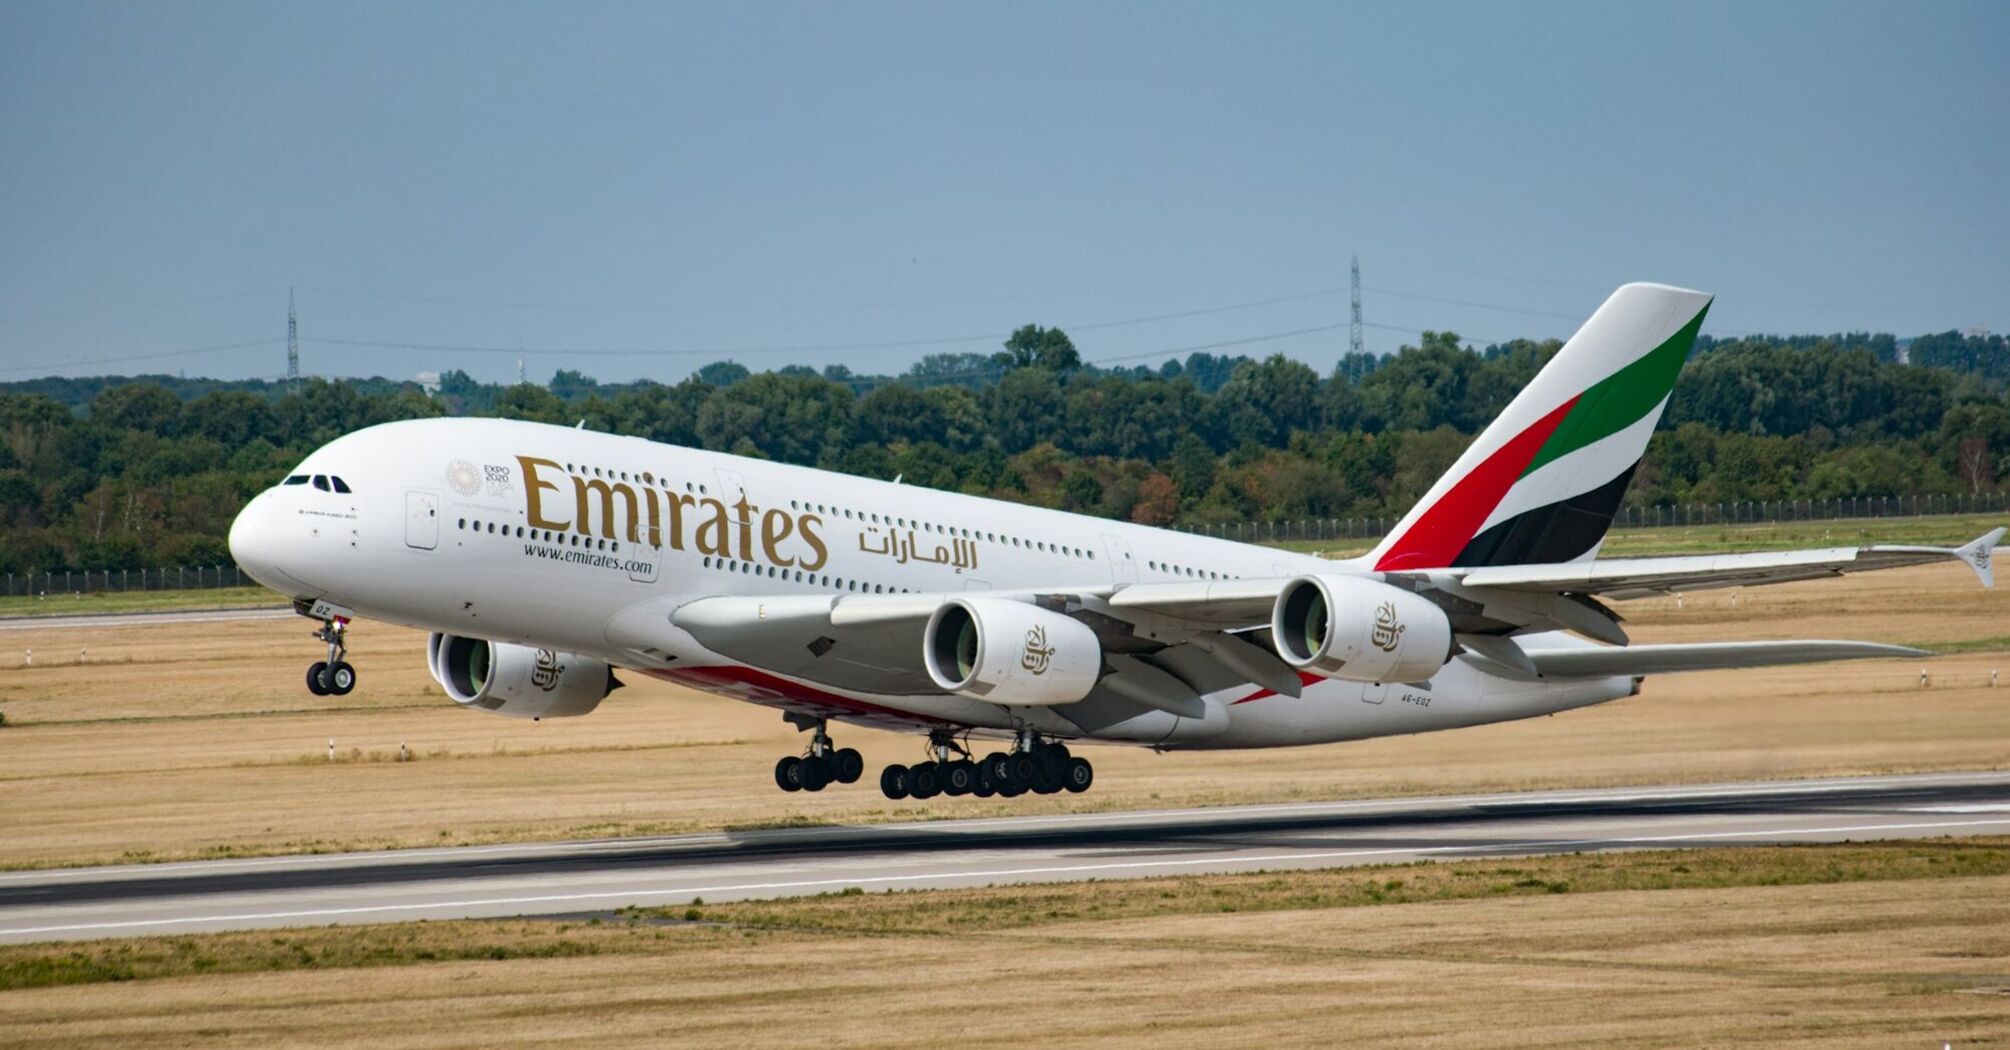 Emirates airplane taking off from a runway